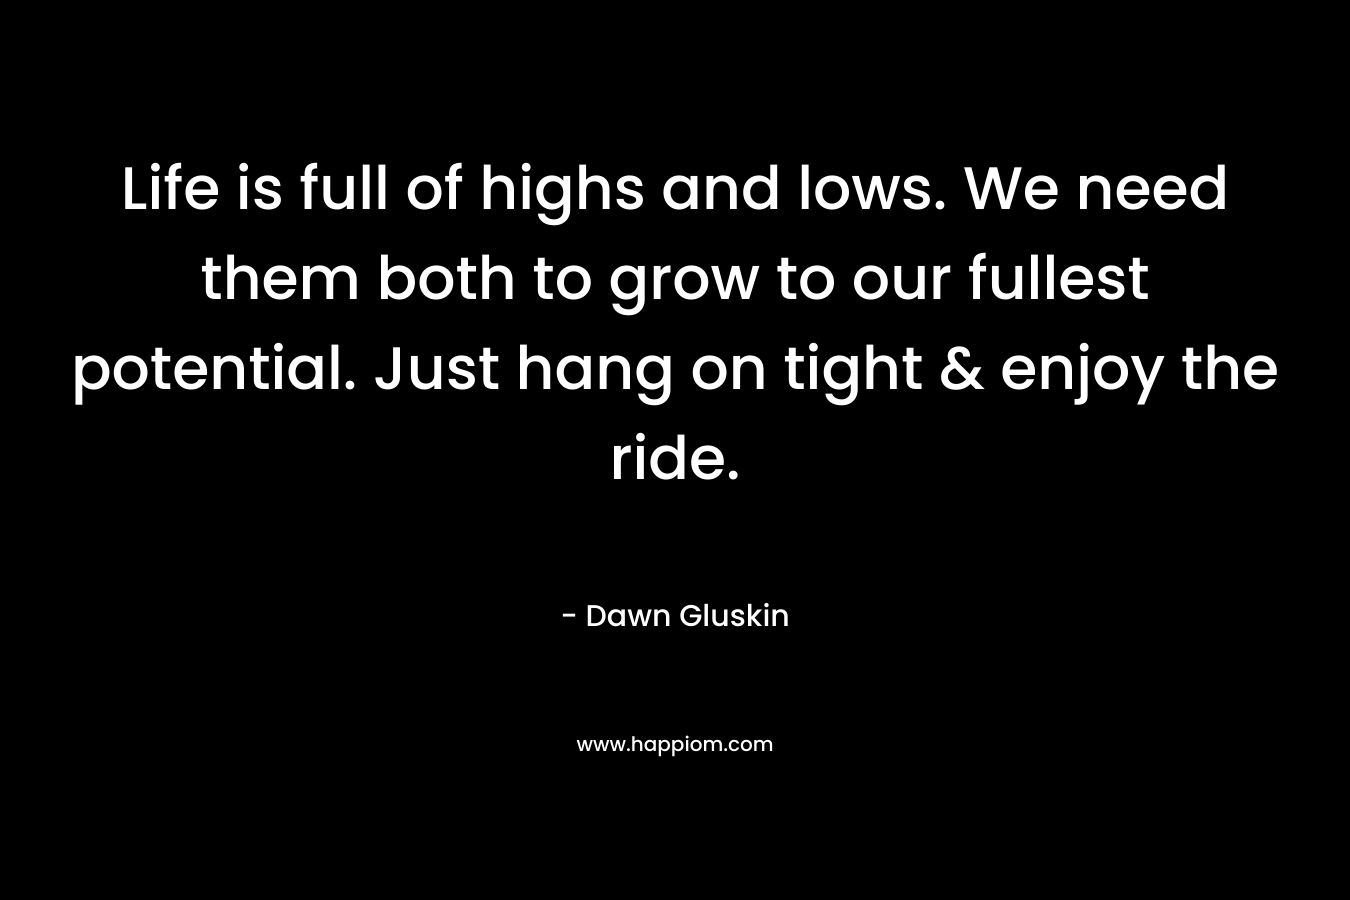 Life is full of highs and lows. We need them both to grow to our fullest potential. Just hang on tight & enjoy the ride.